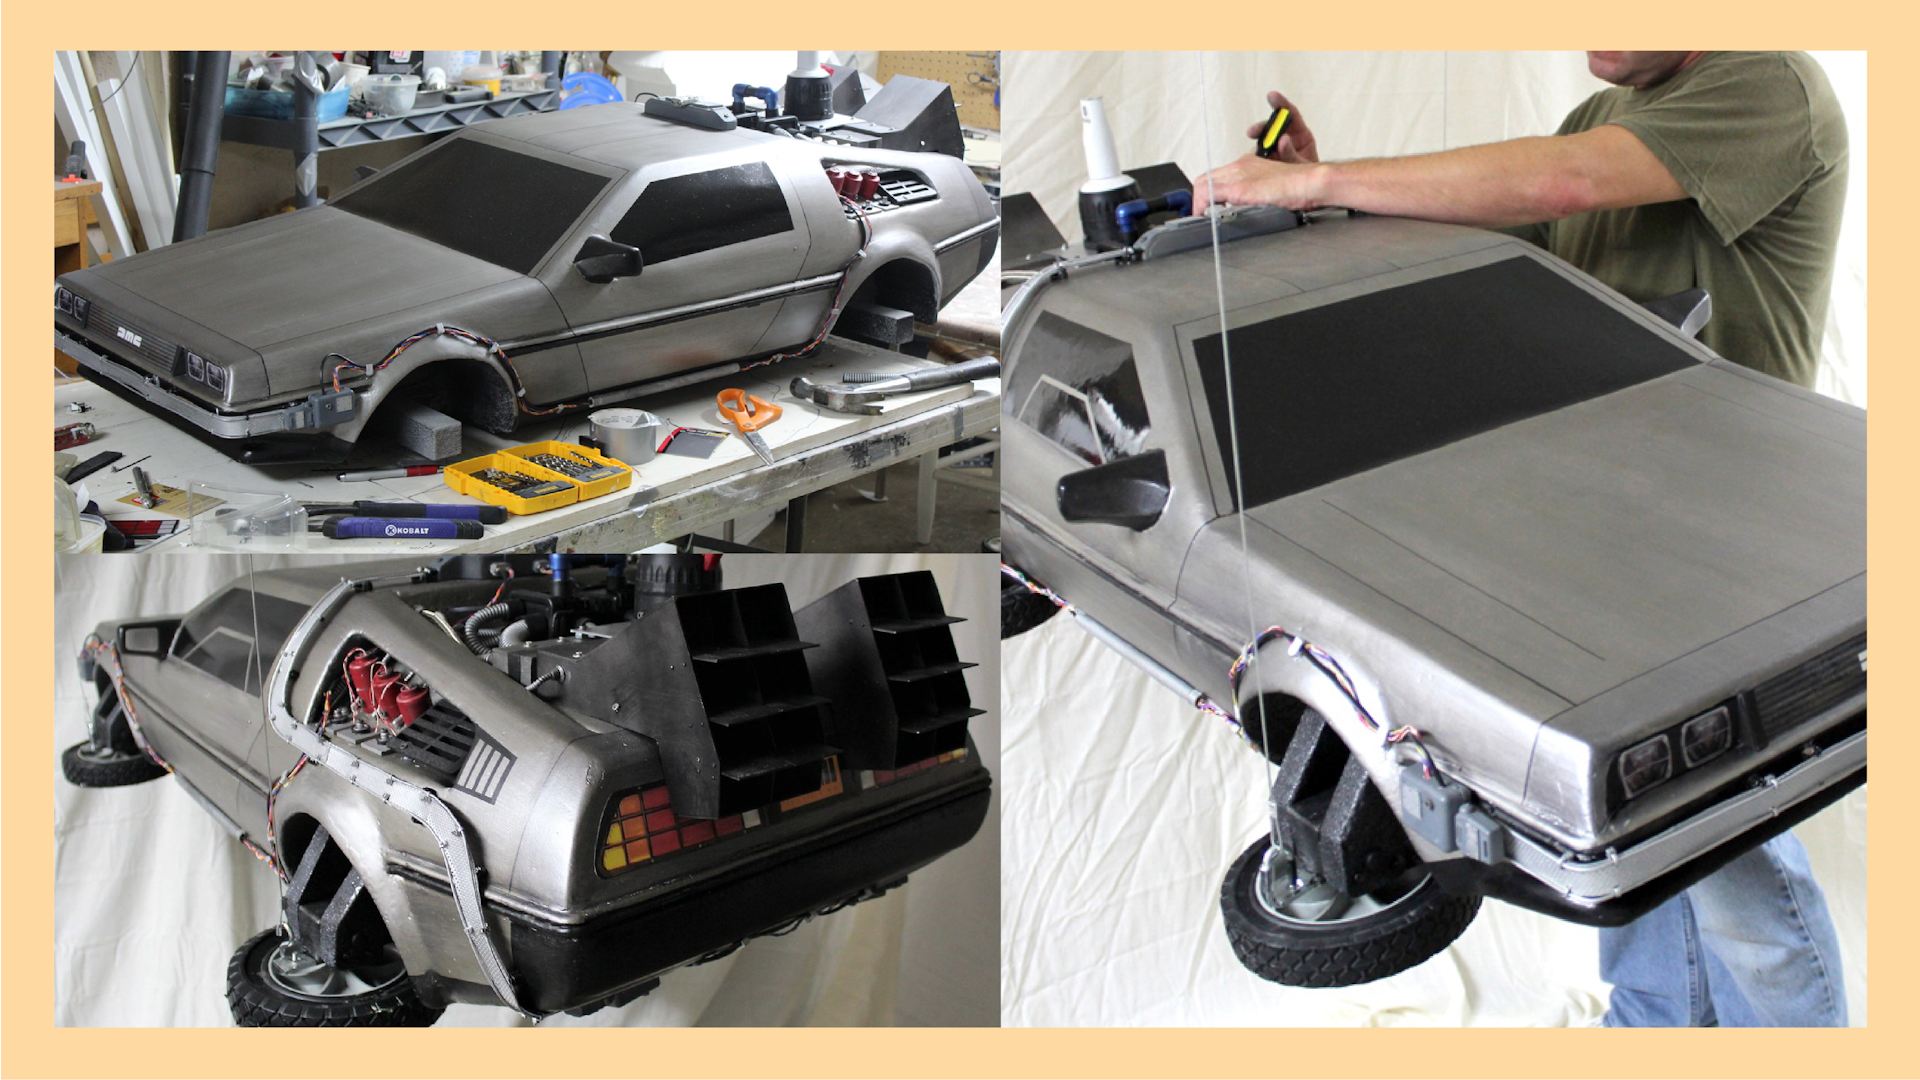 A collage of images from the Dolorean model from Back to the Future II hanging by fishing line against a white backdrop, and a photo of it on the design table getting assembled. 